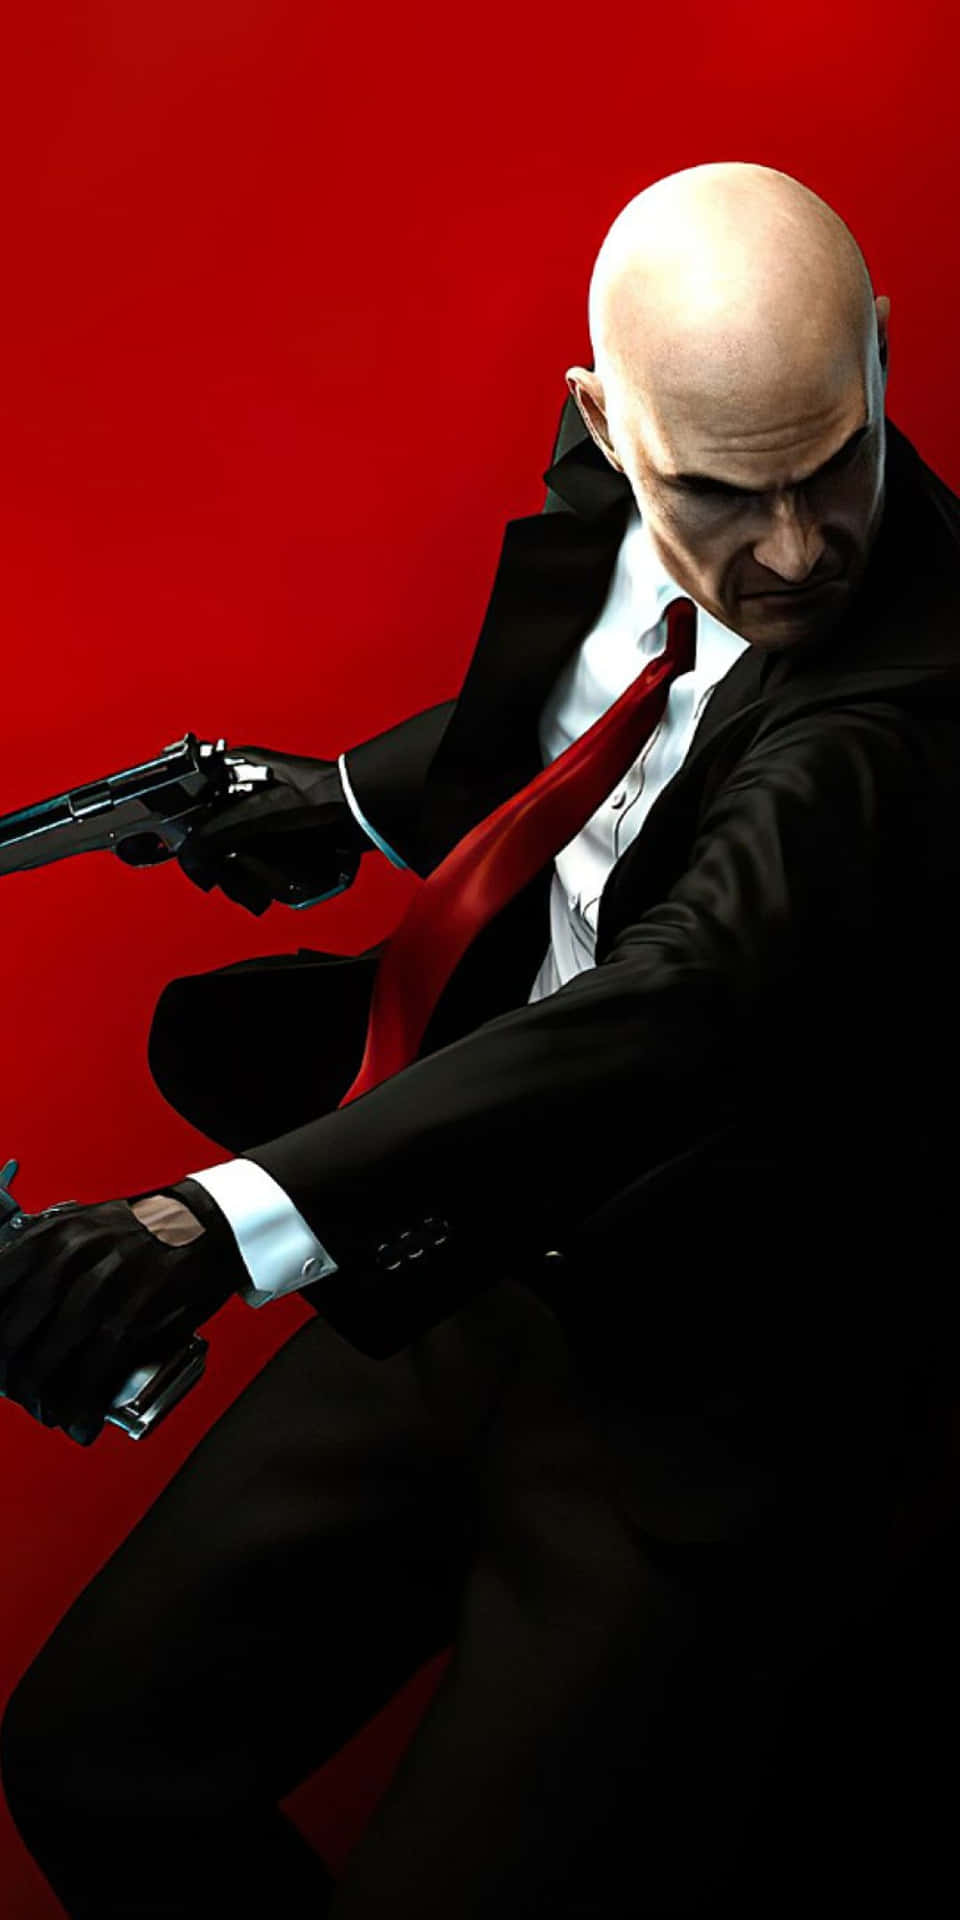 Get into stealth mode with your Pixel 3 and the Hitman Absolution game